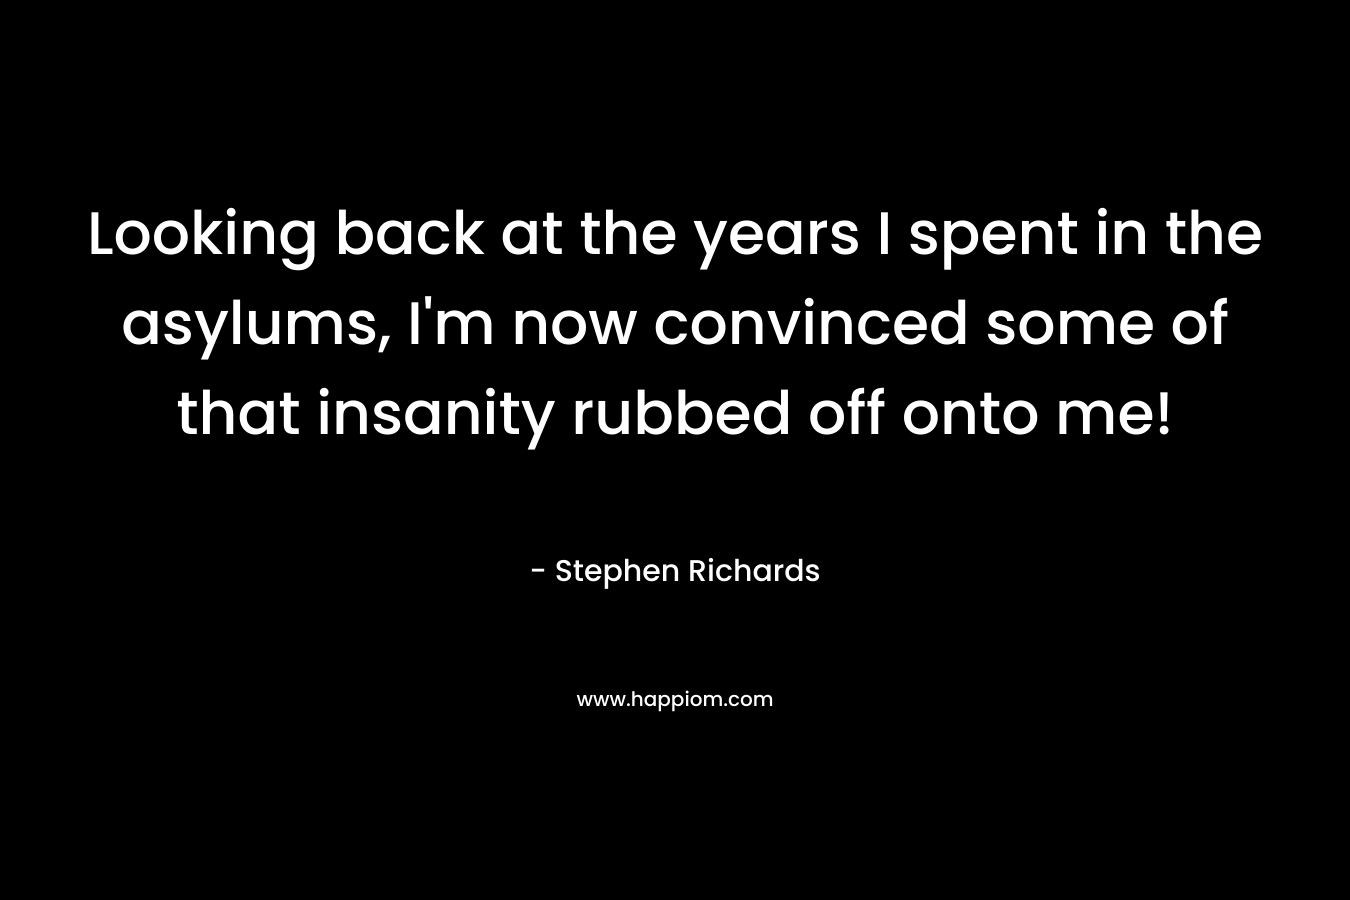 Looking back at the years I spent in the asylums, I’m now convinced some of that insanity rubbed off onto me! – Stephen Richards